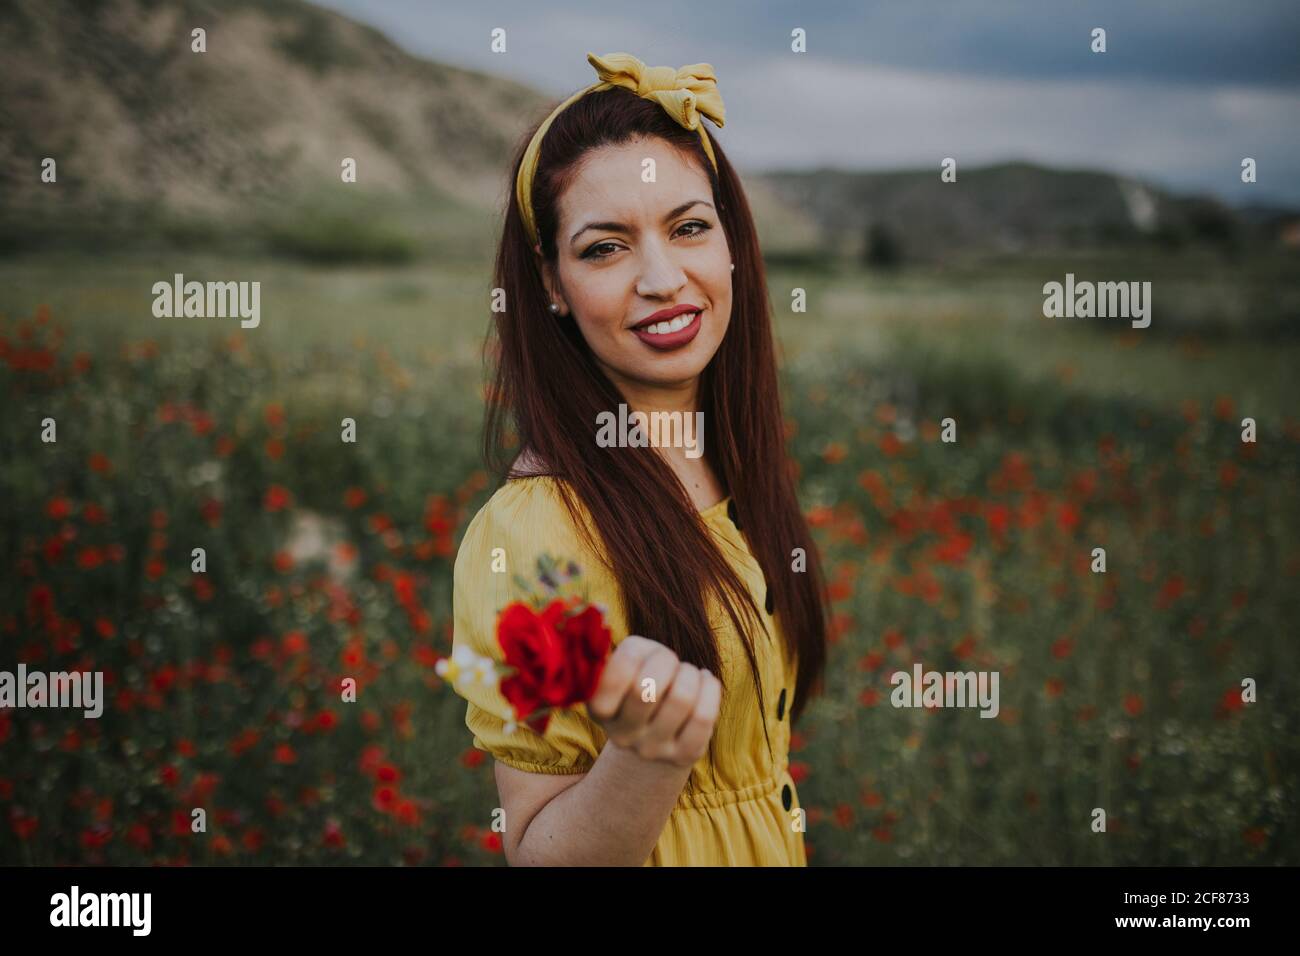 Smiling attractive red haired adult female in yellow dress and headband with red lips holding bouquet with red rose and looking at camera while standing alone in blurred green meadow with red flowers against hills under gray cloudy sky during daytime Stock Photo